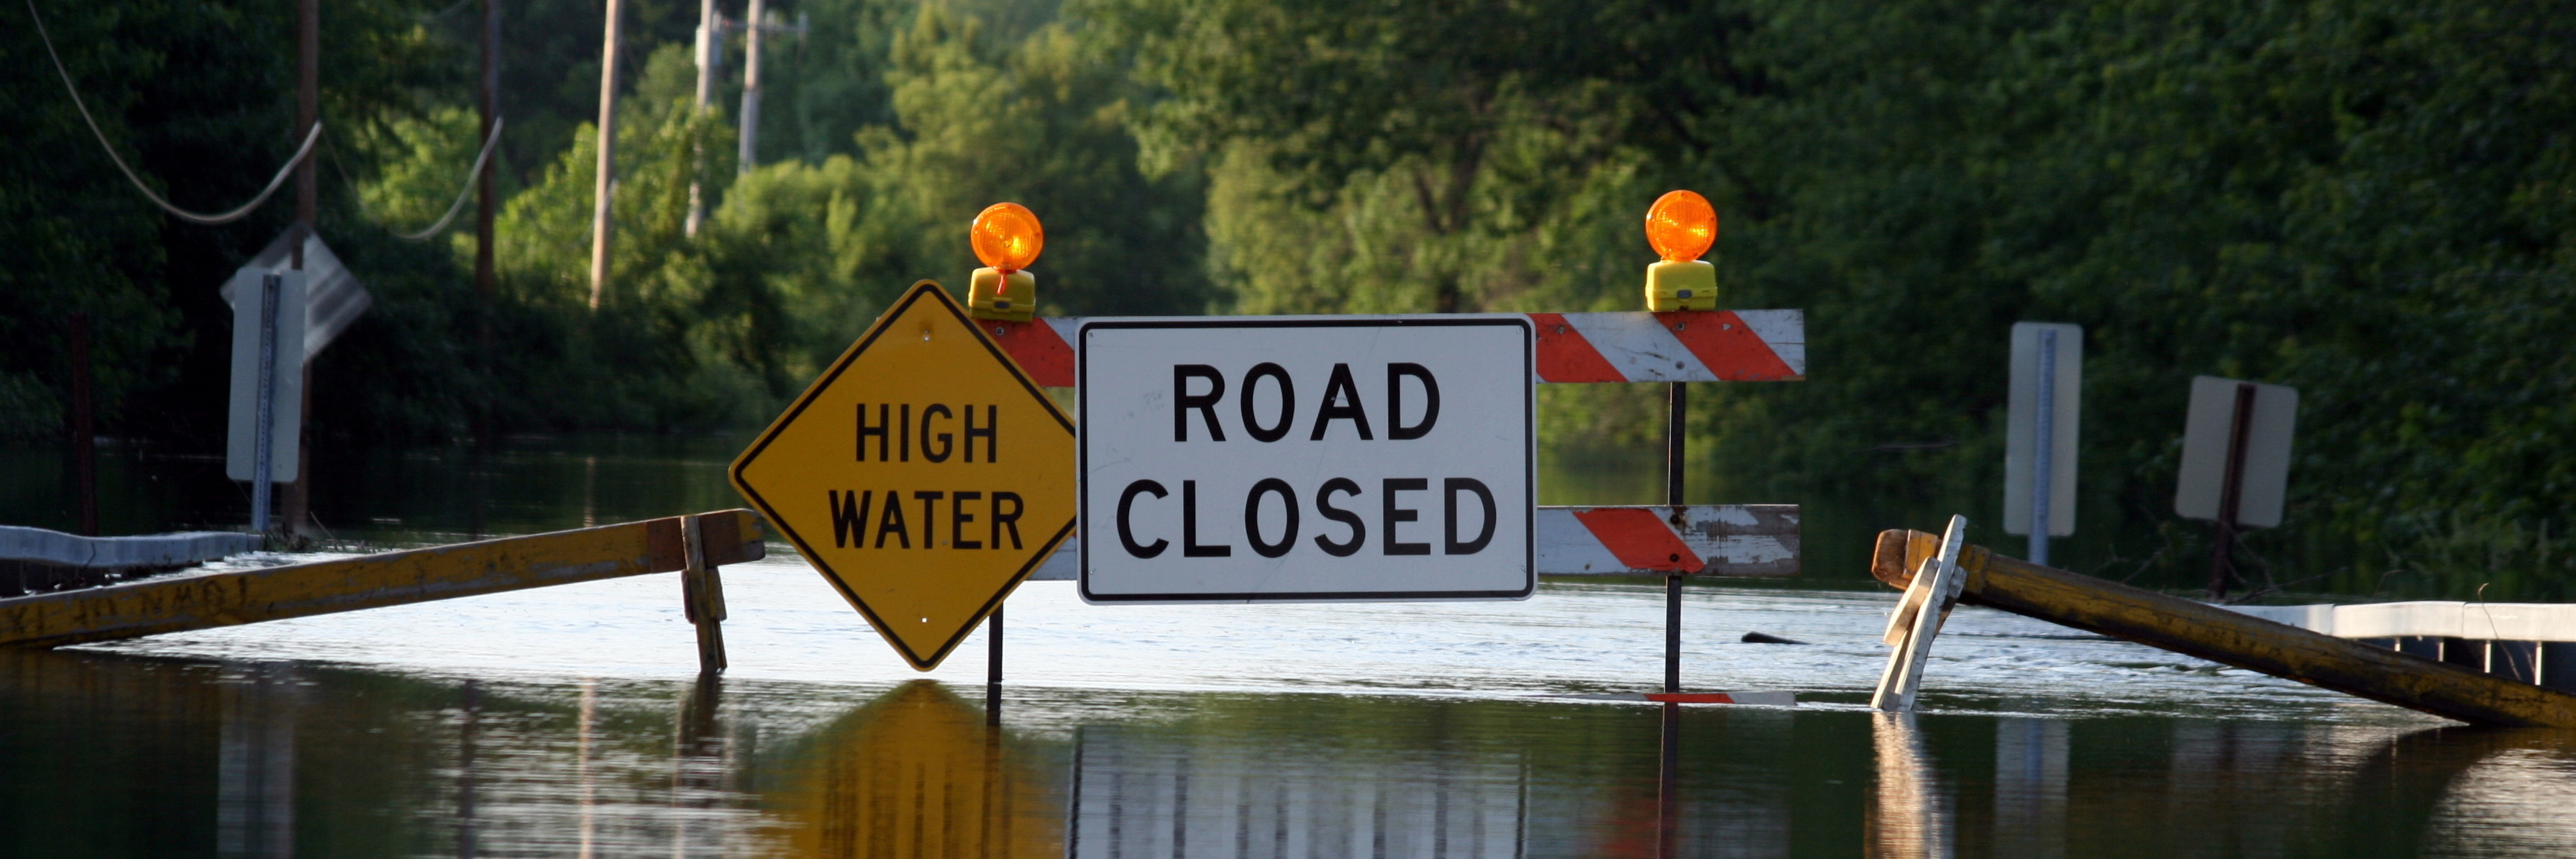 high water signage